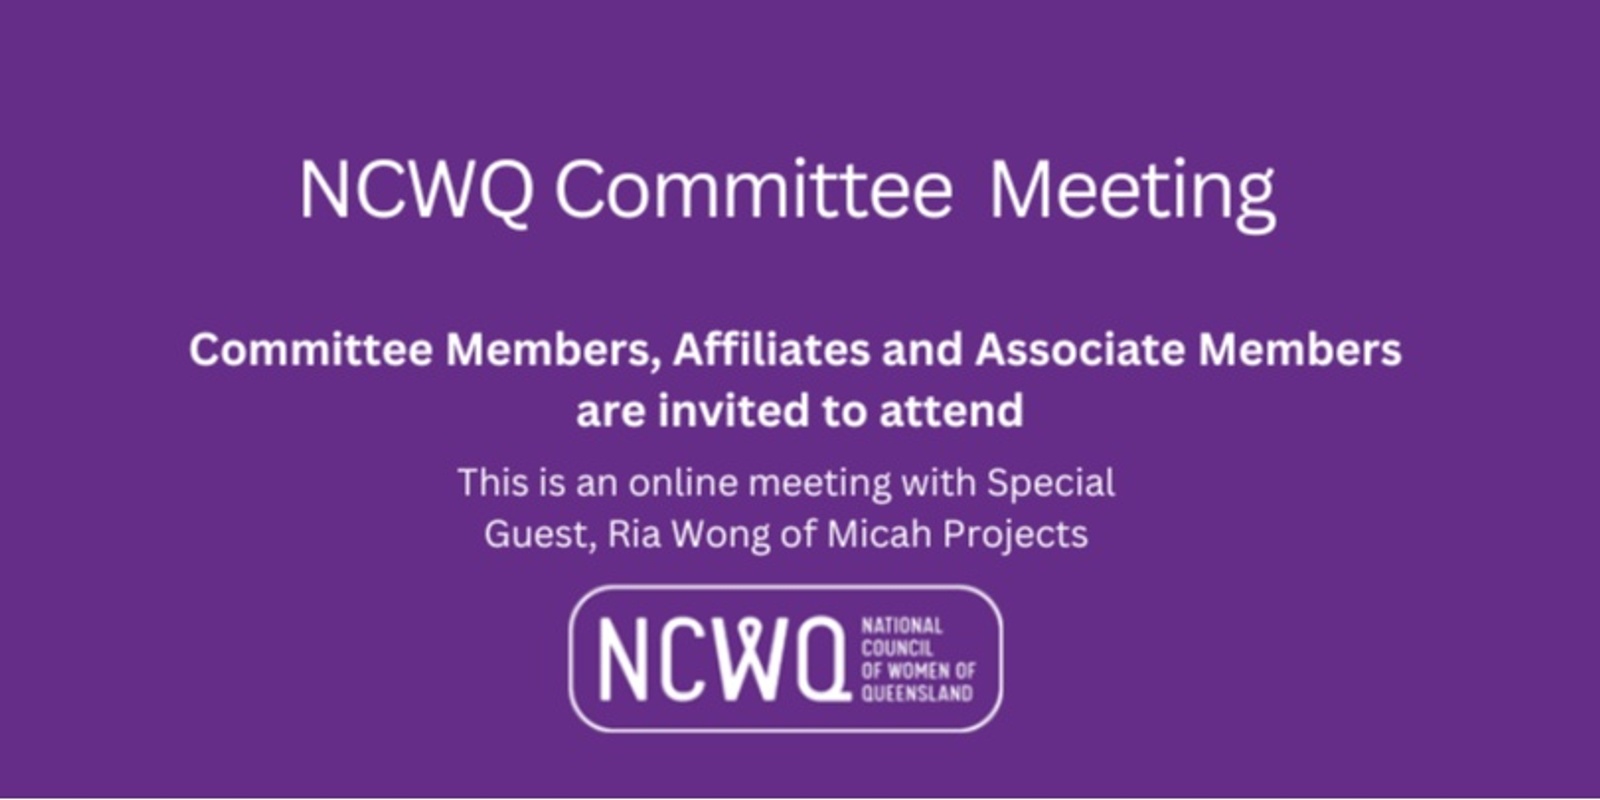 Banner image for NCWQ Committee Meeting with Special Guest Ria Wong, from Micah Projects